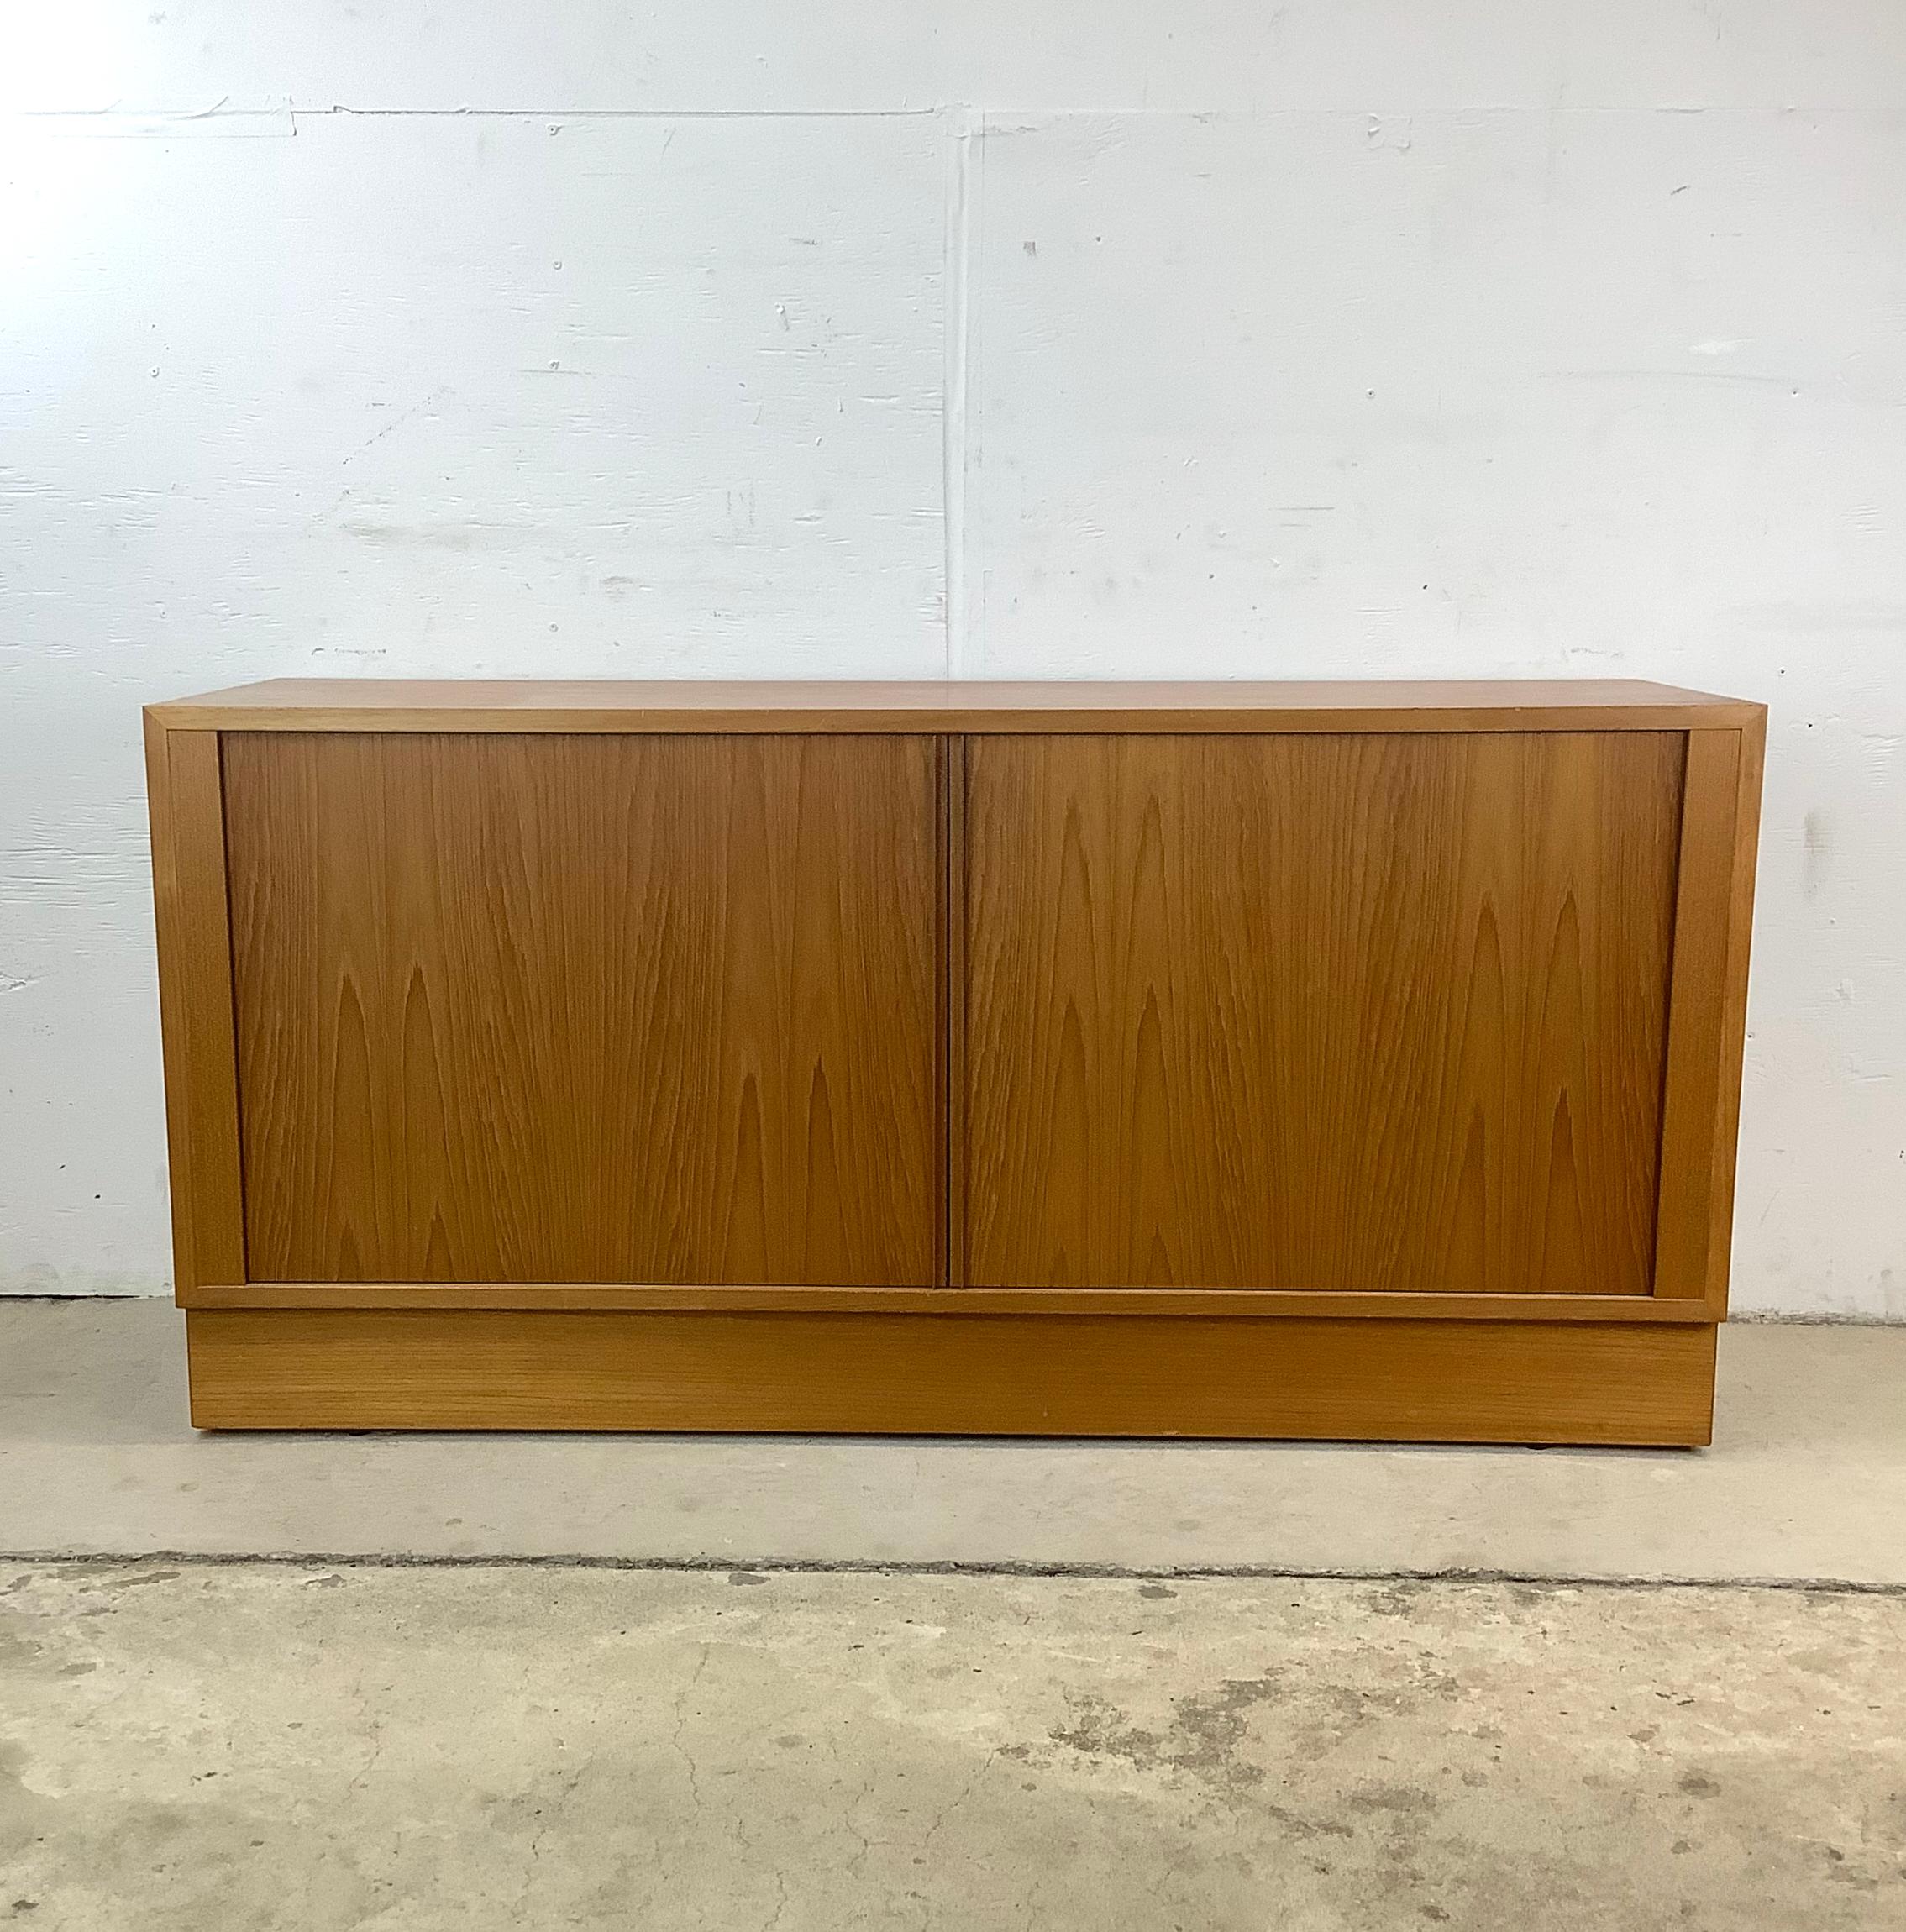 This Vintage Teak Office Credenza is a sophisticated blend of Scandinavian modern design and timeless elegance, crafted with exquisite teak finish. This vintage office credenza embodies the essence of mid-century Danish charm, with its sleek lines